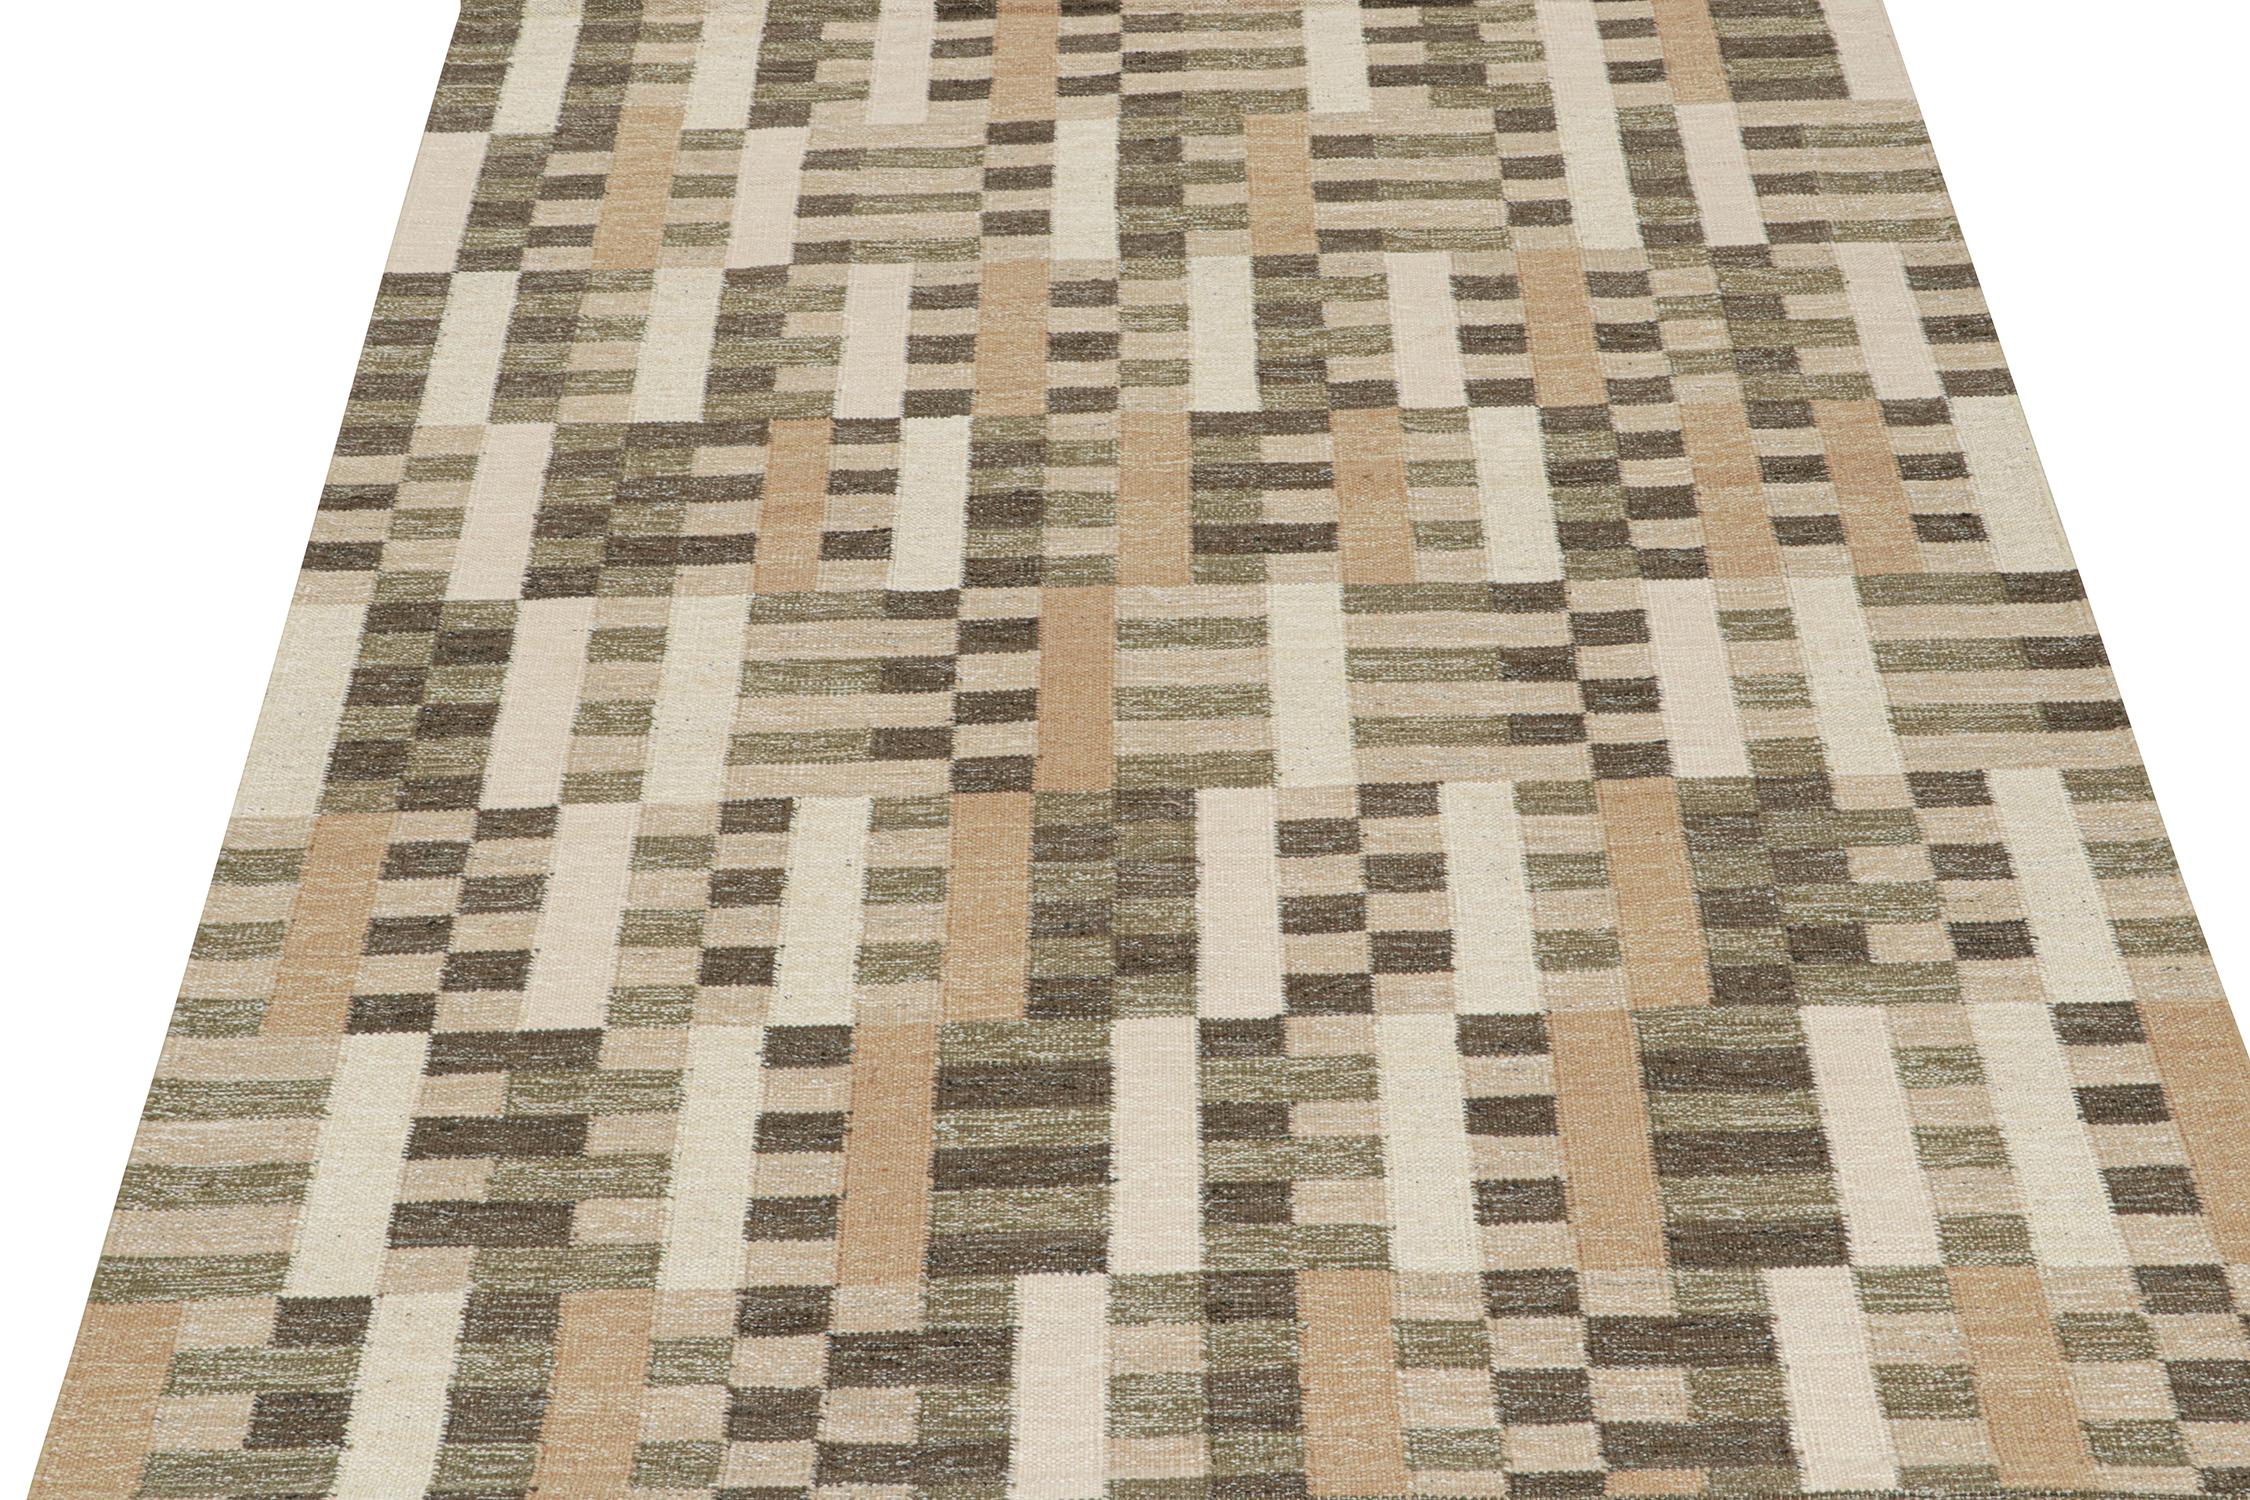 This 8x10 flat weave is a new addition to the Scandinavian Kilim collection by Rug & Kilim. Handwoven in wool and natural yarns, its design reflects a contemporary take on mid-century Rollakans and Swedish Deco style.

On the Design:

This new flat